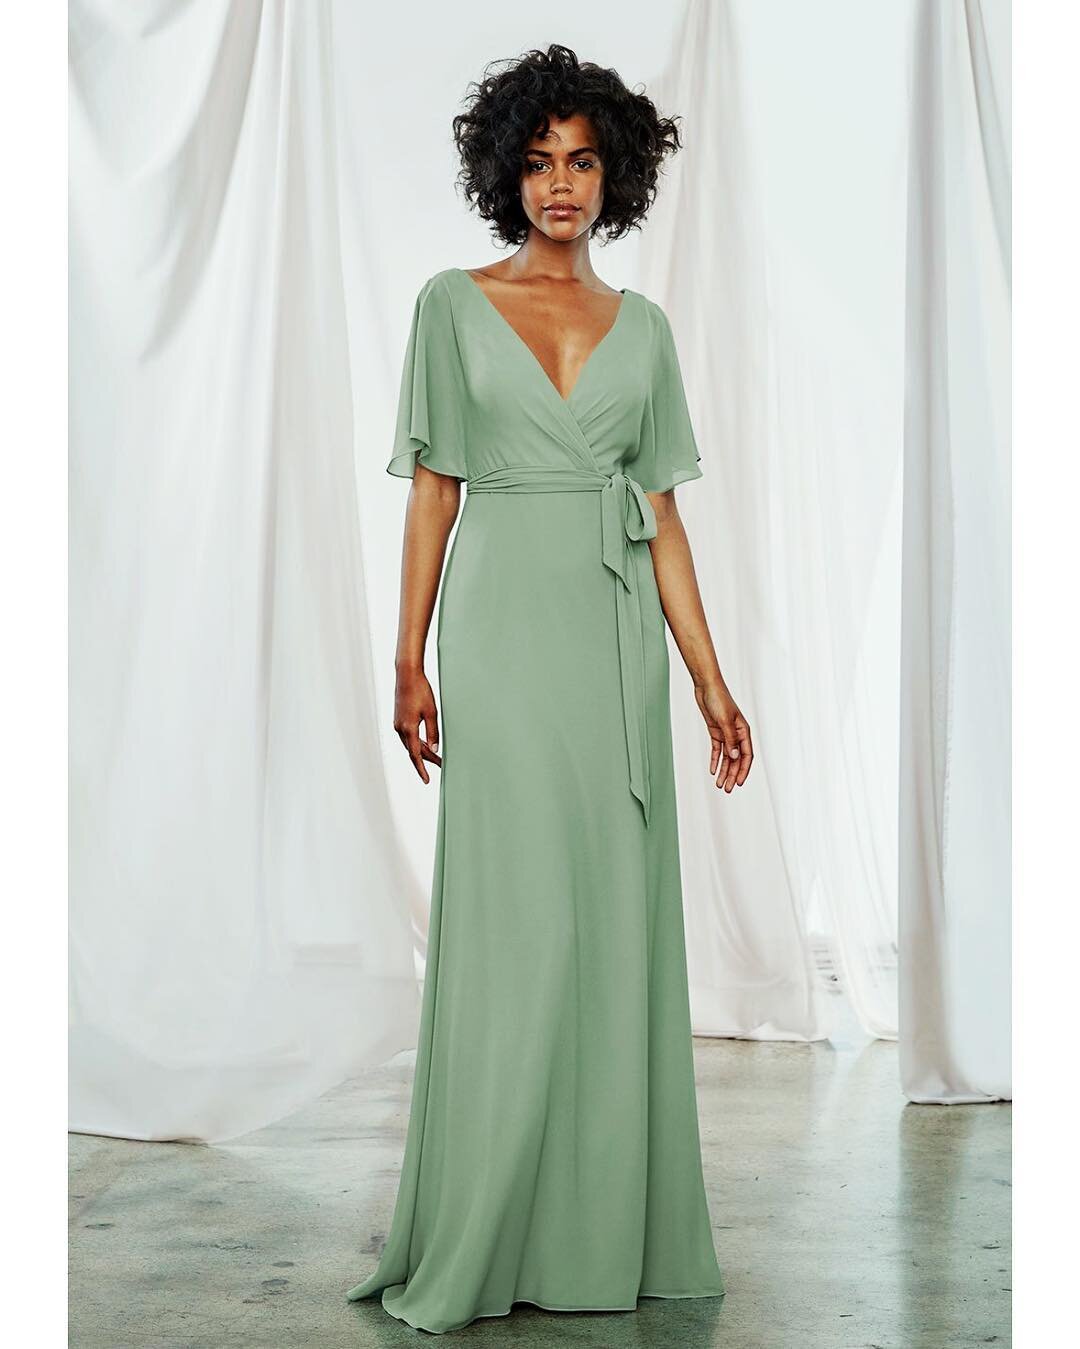 GOOD MORNING AVA: Introducing one of our new Amsale #bridesmaidsdresses in Flat Chiffon. We love this style for its versatility and flattering details, perfect for all body types!  Available in 30 different colours 🙌🏼 2019 collection arriving next 